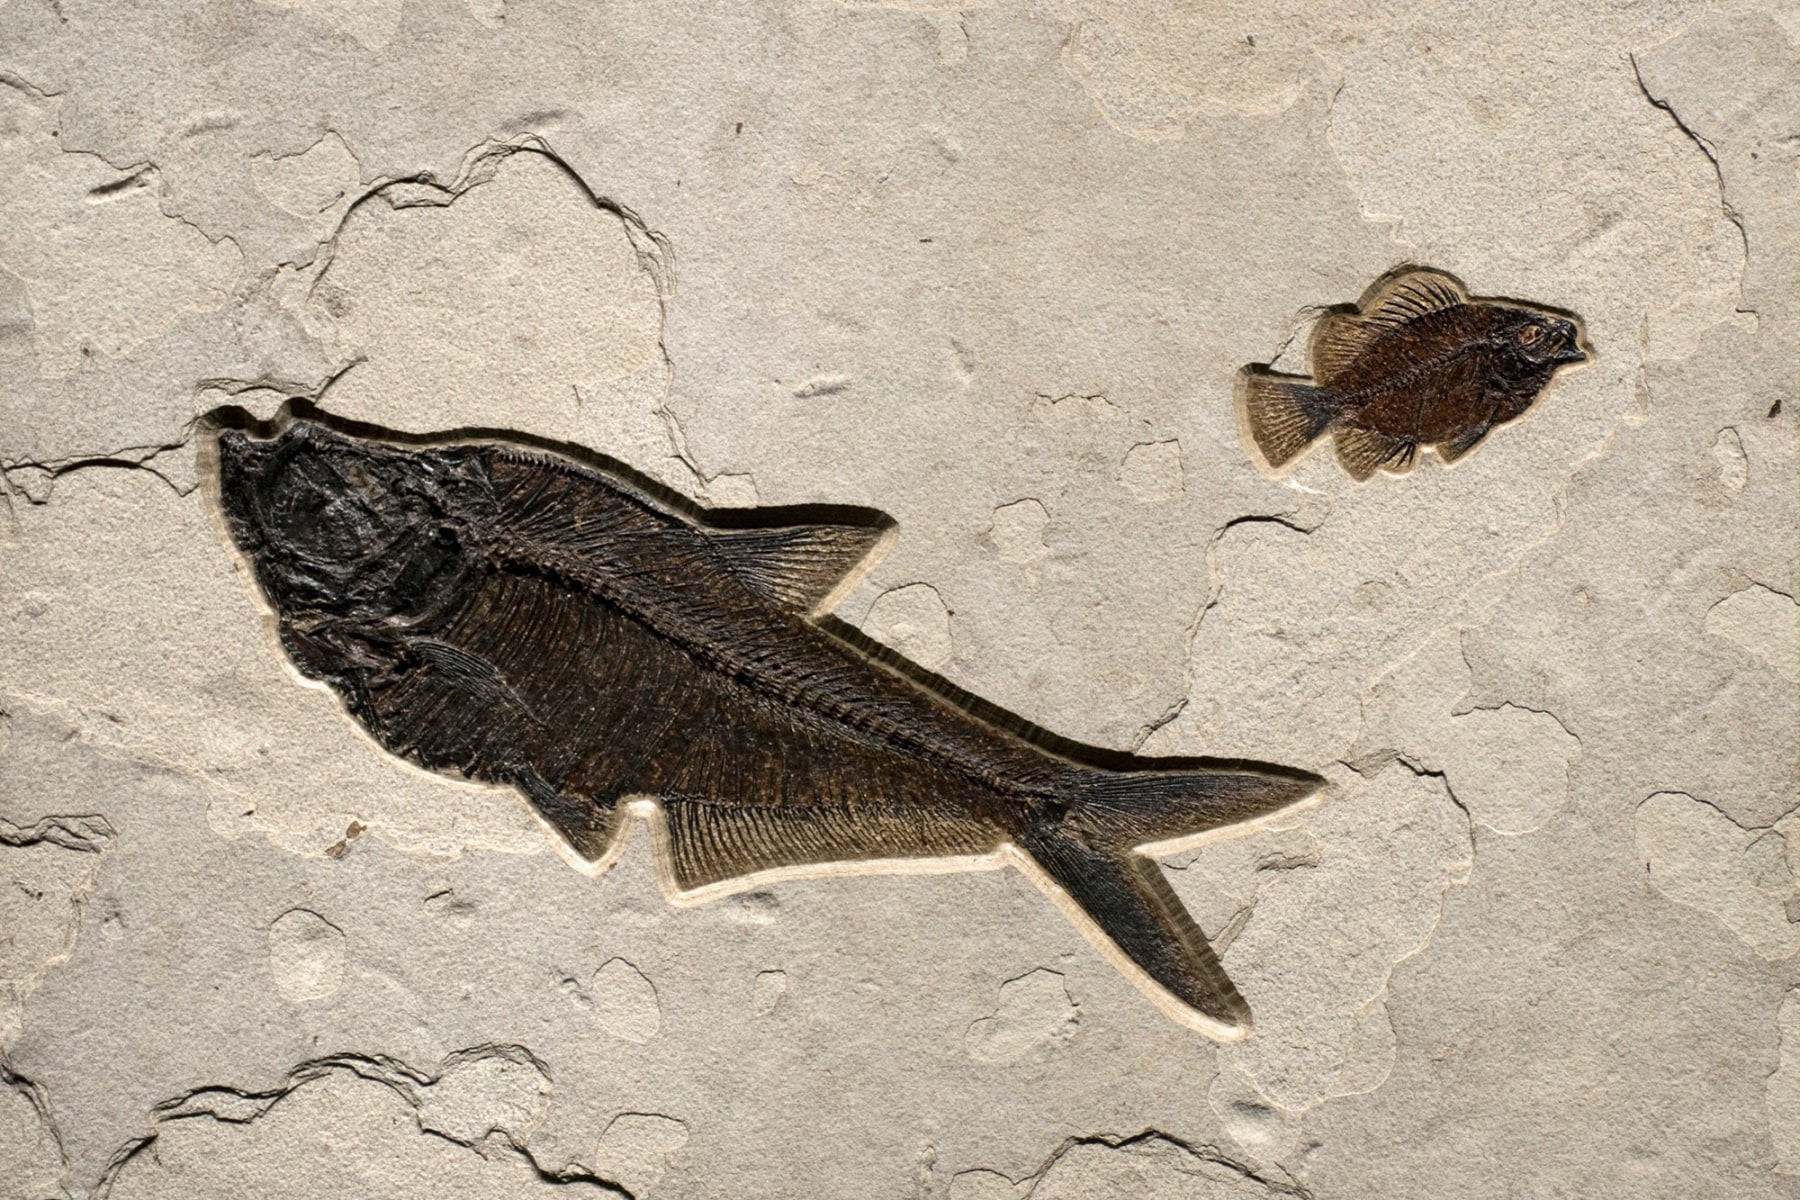 A 16" x 24" Natural fossil fish tile containing a Diplomsytus and a Cockerellites